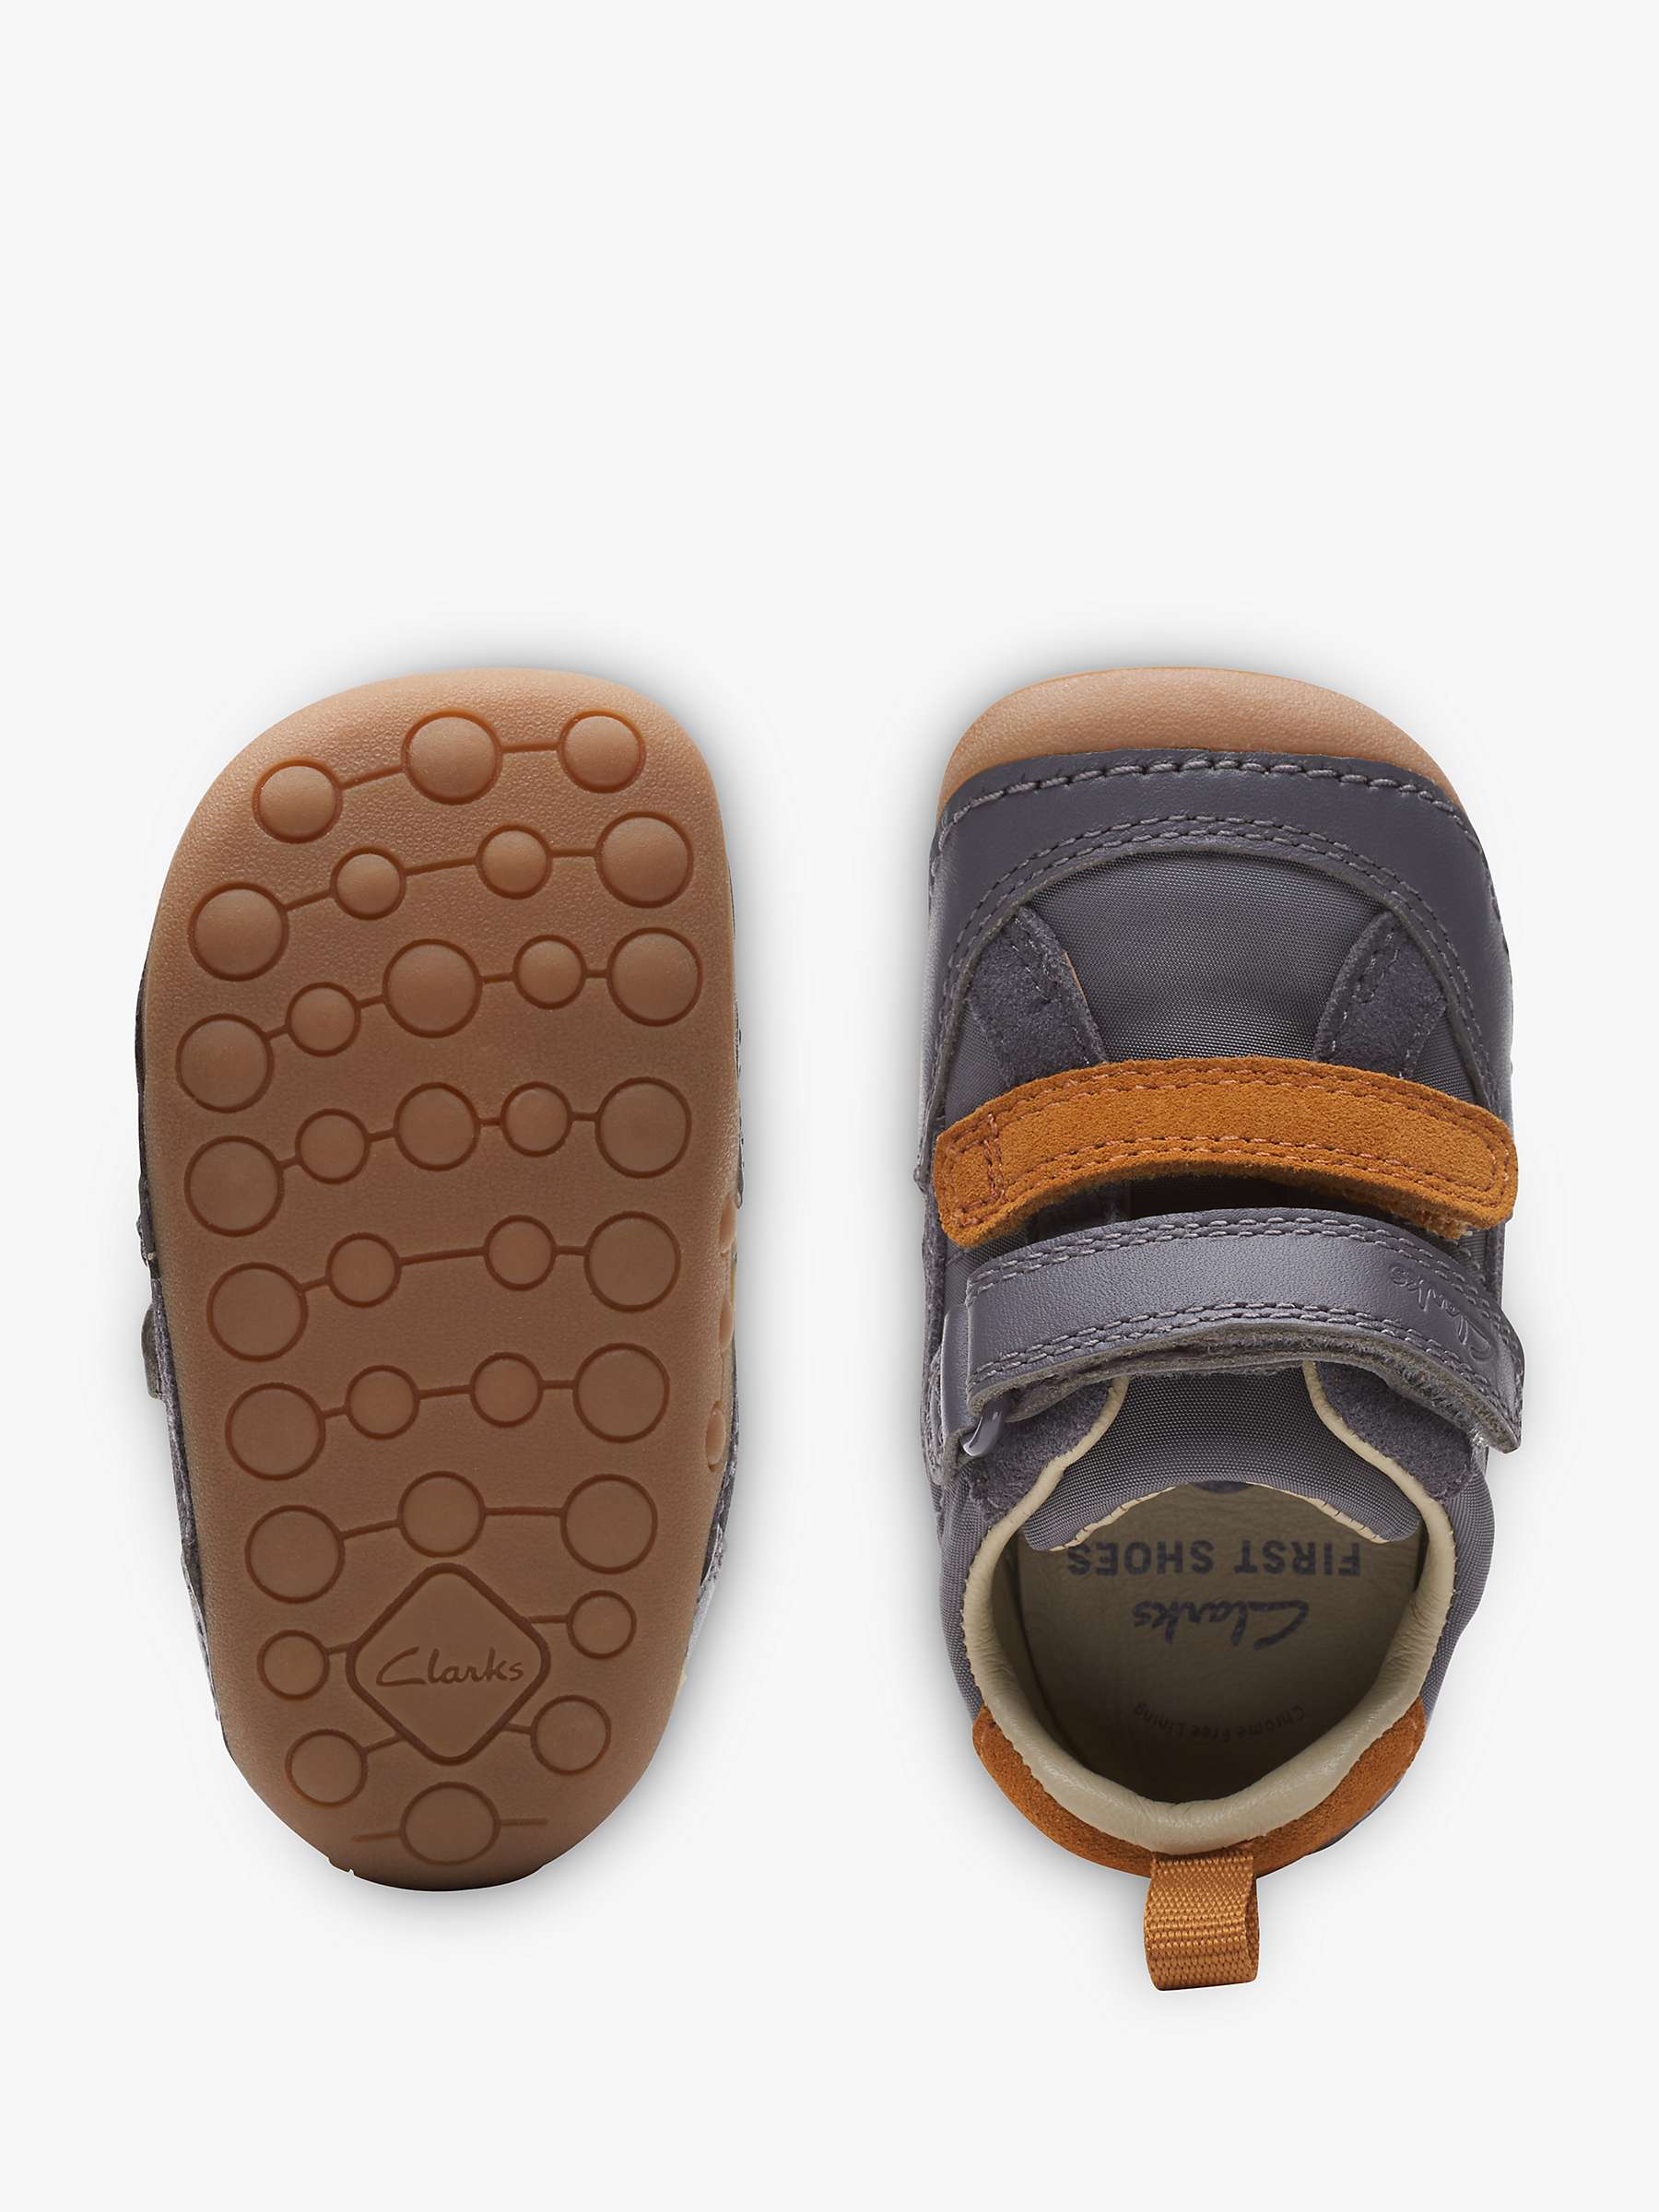 Buy Clarks Baby Tiny Fawn Pre-Walker Shoes, Grey/Tan Online at johnlewis.com